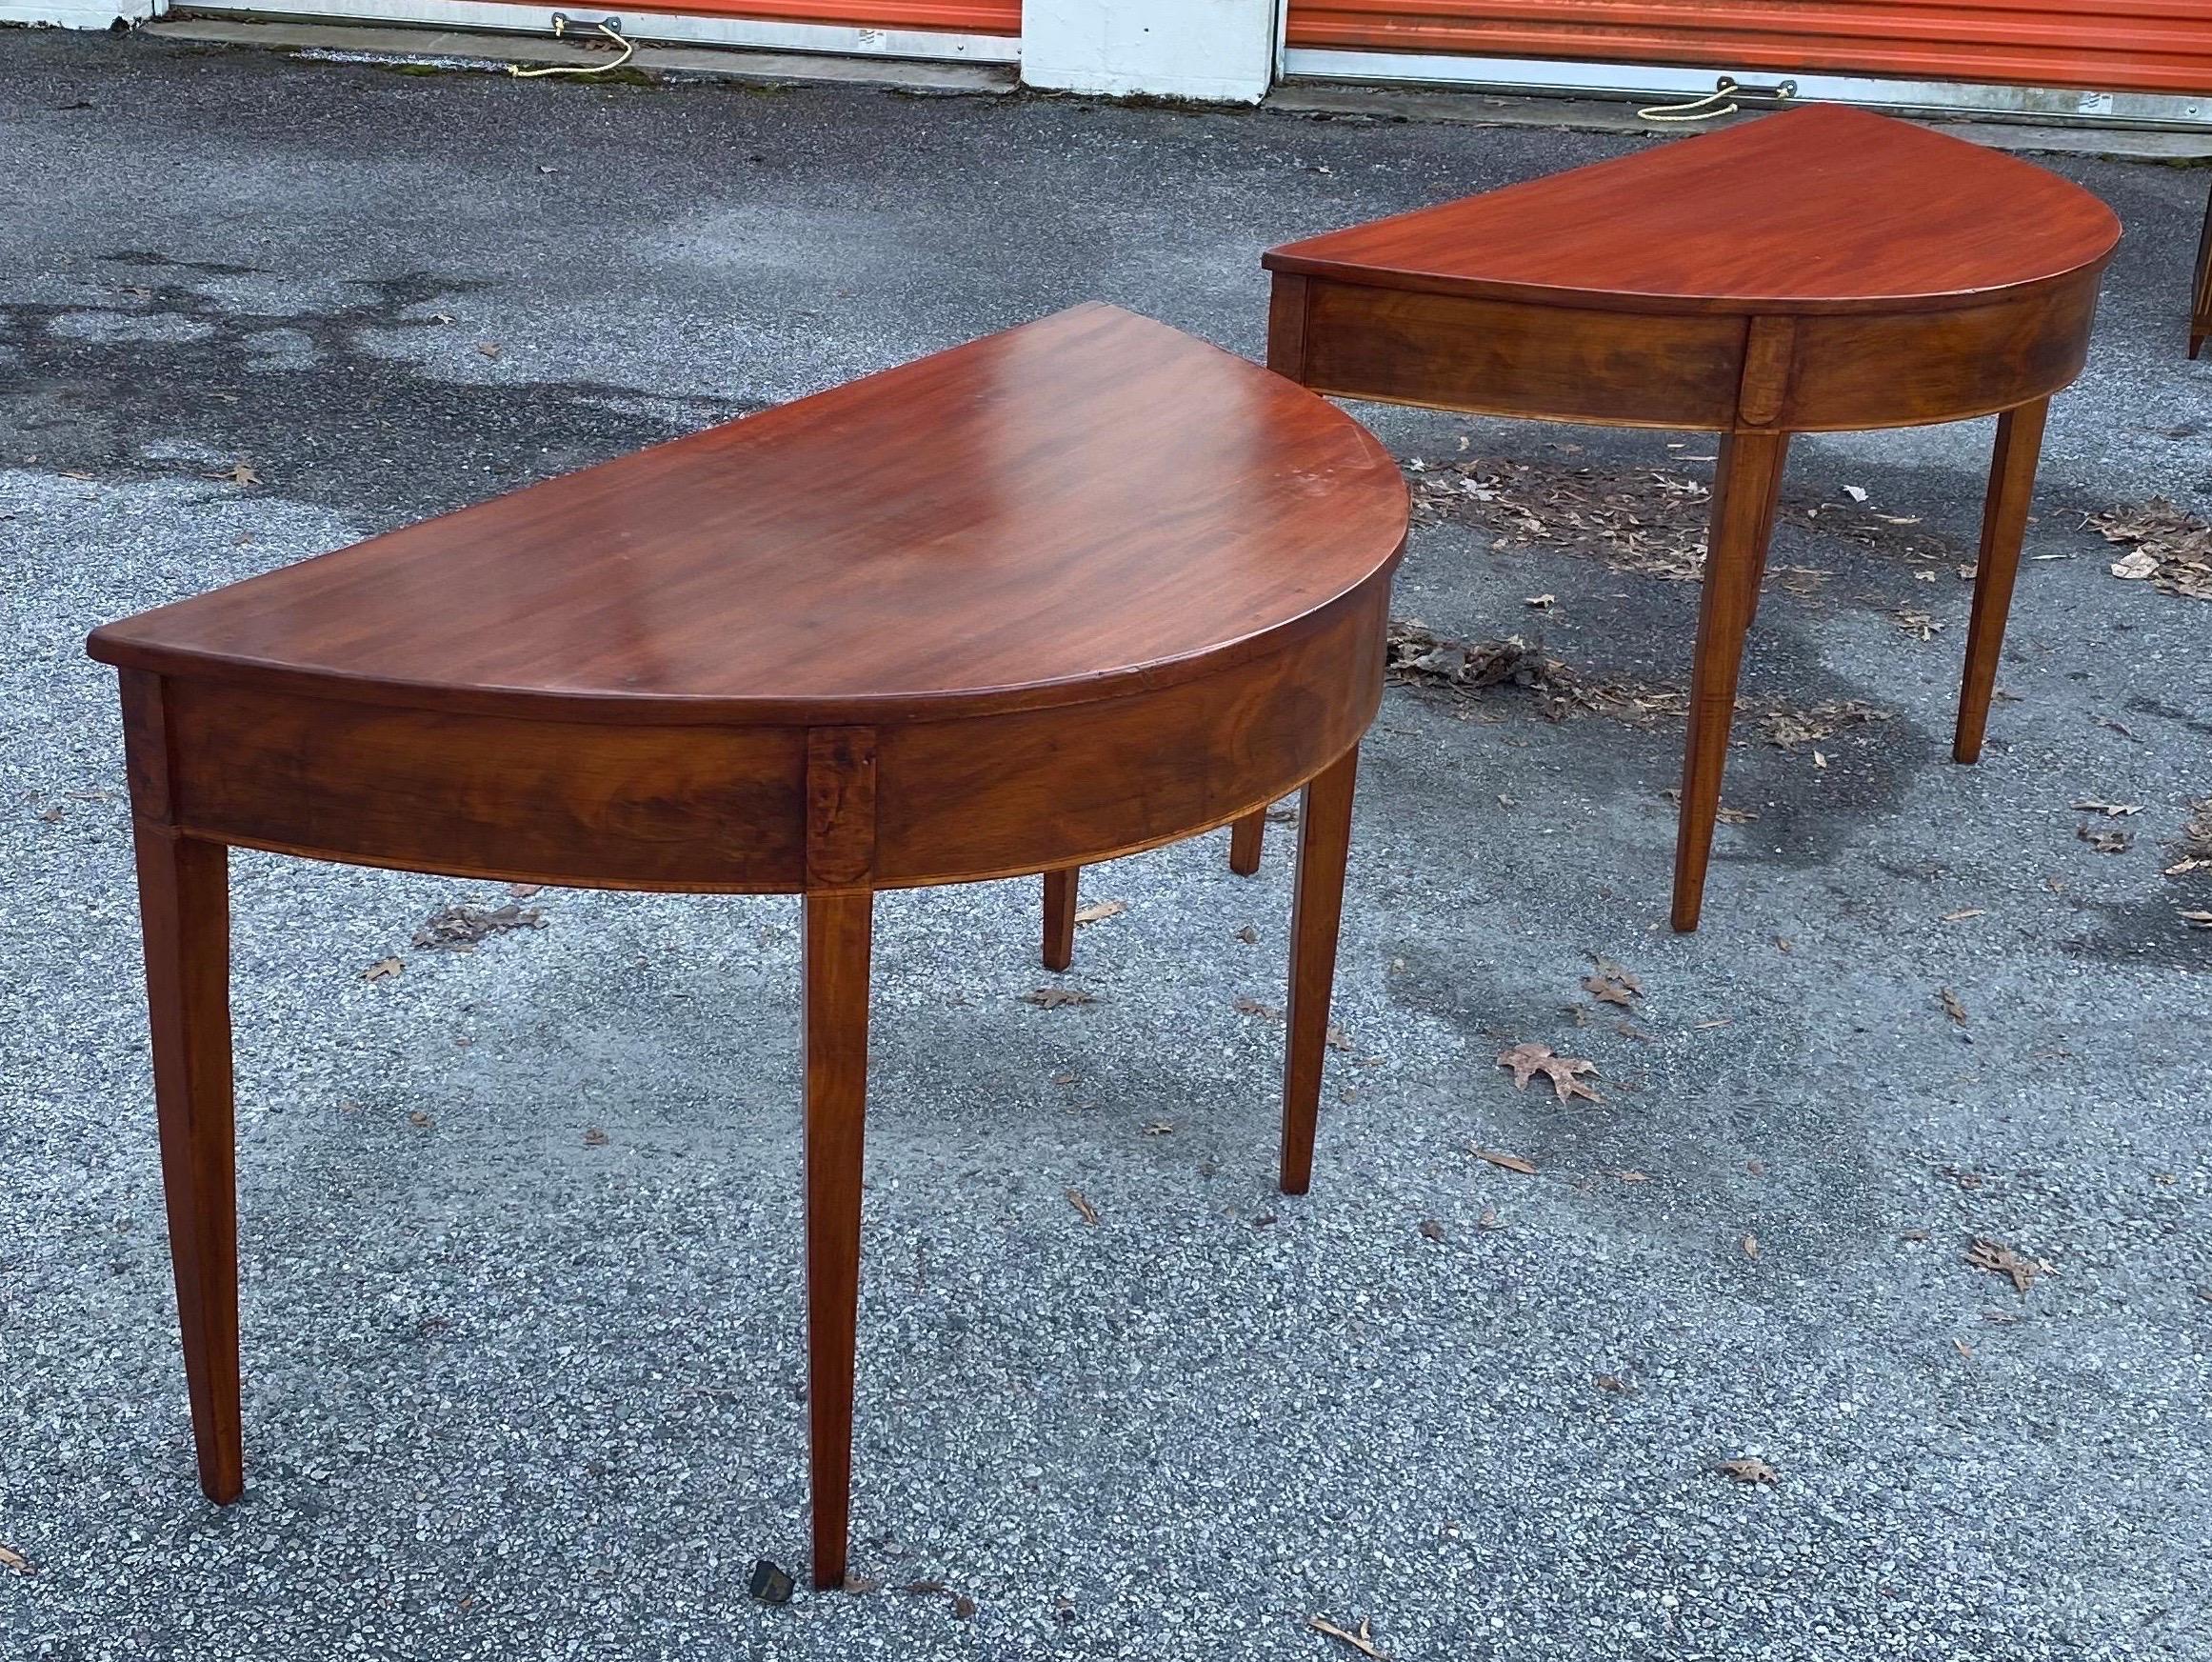 Great pair of 19th century mahogany demilune consoles from an American federal period table. Can be placed together as a dining table.